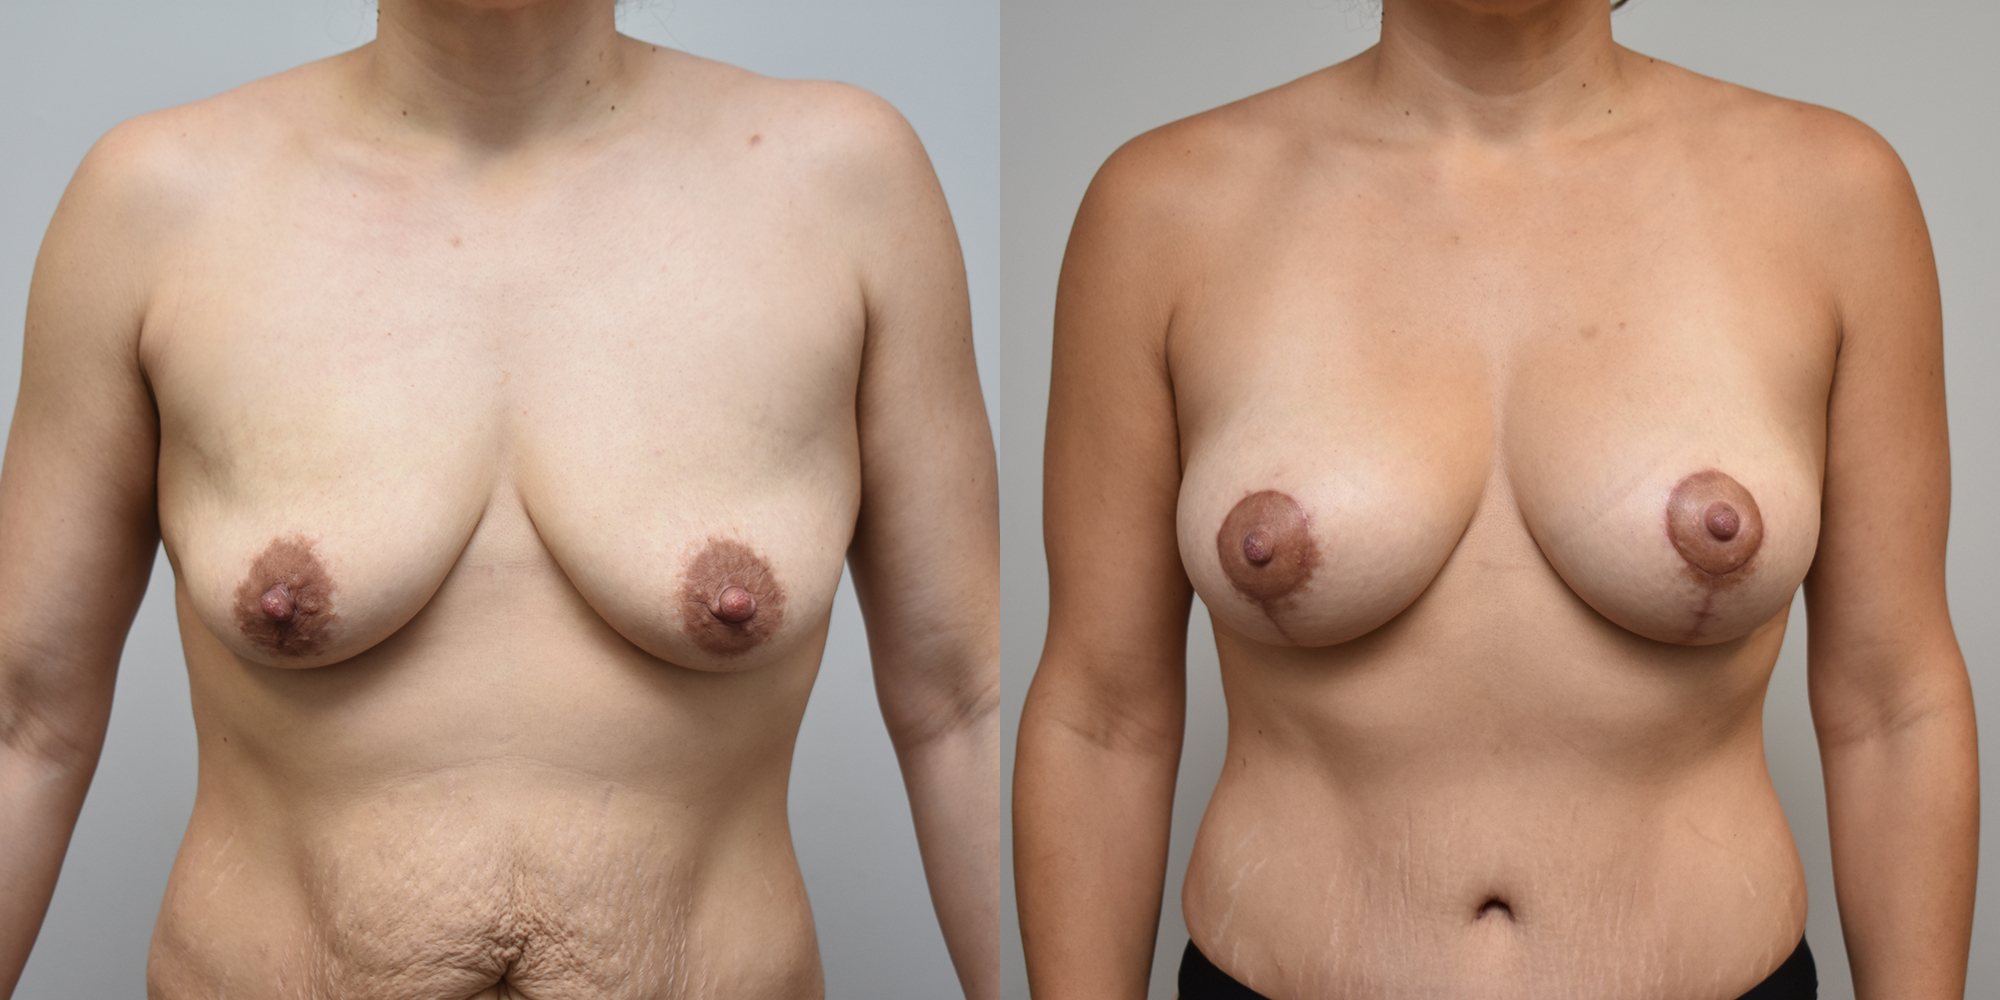 Breast Augmentation Before and After photo by Susan Gannon, MD of The Plastic Surgery Group in Albany, NY